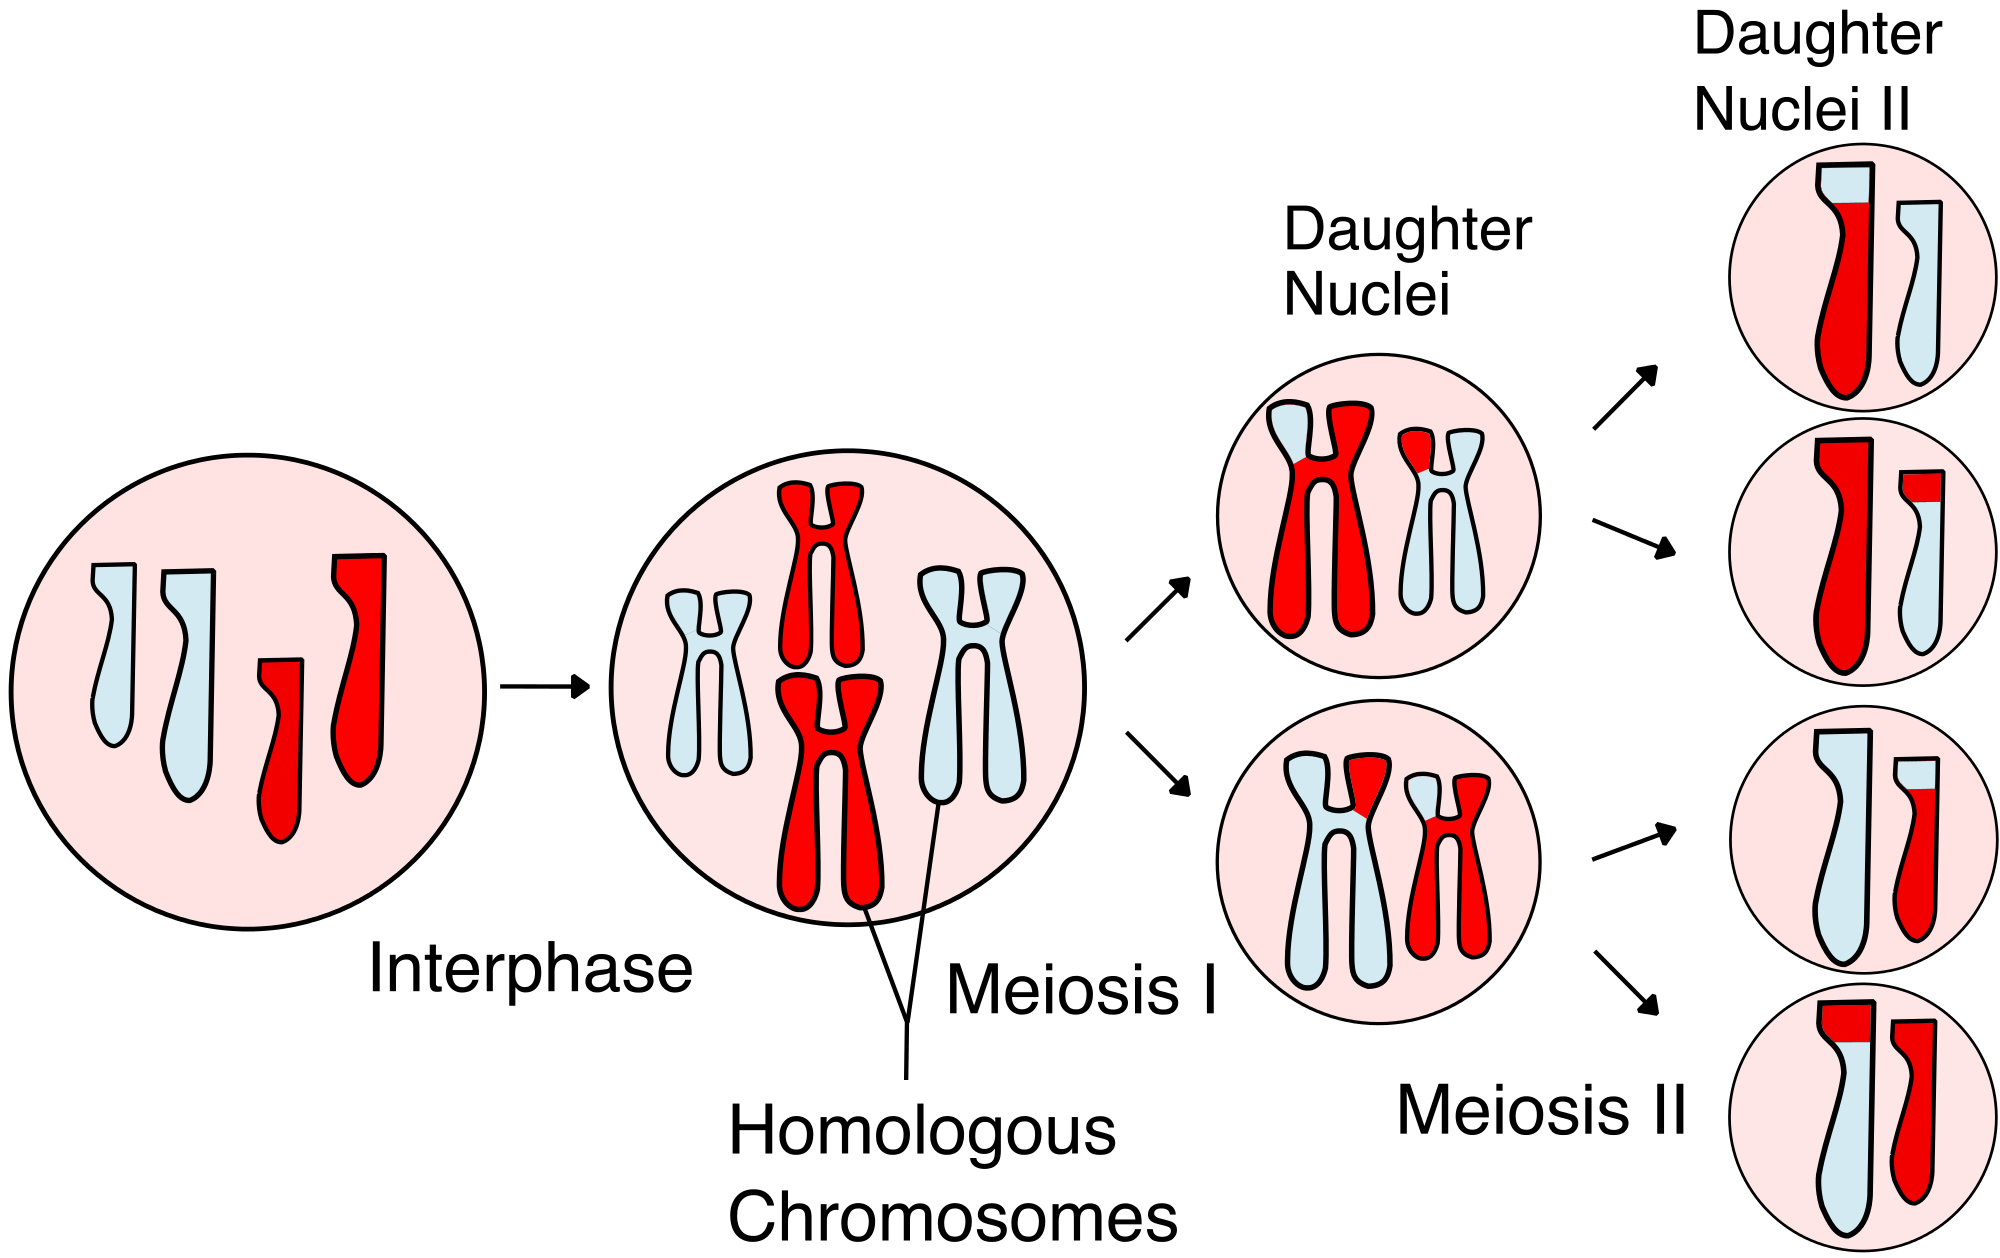 which diagram represents anaphase i of meiosis?